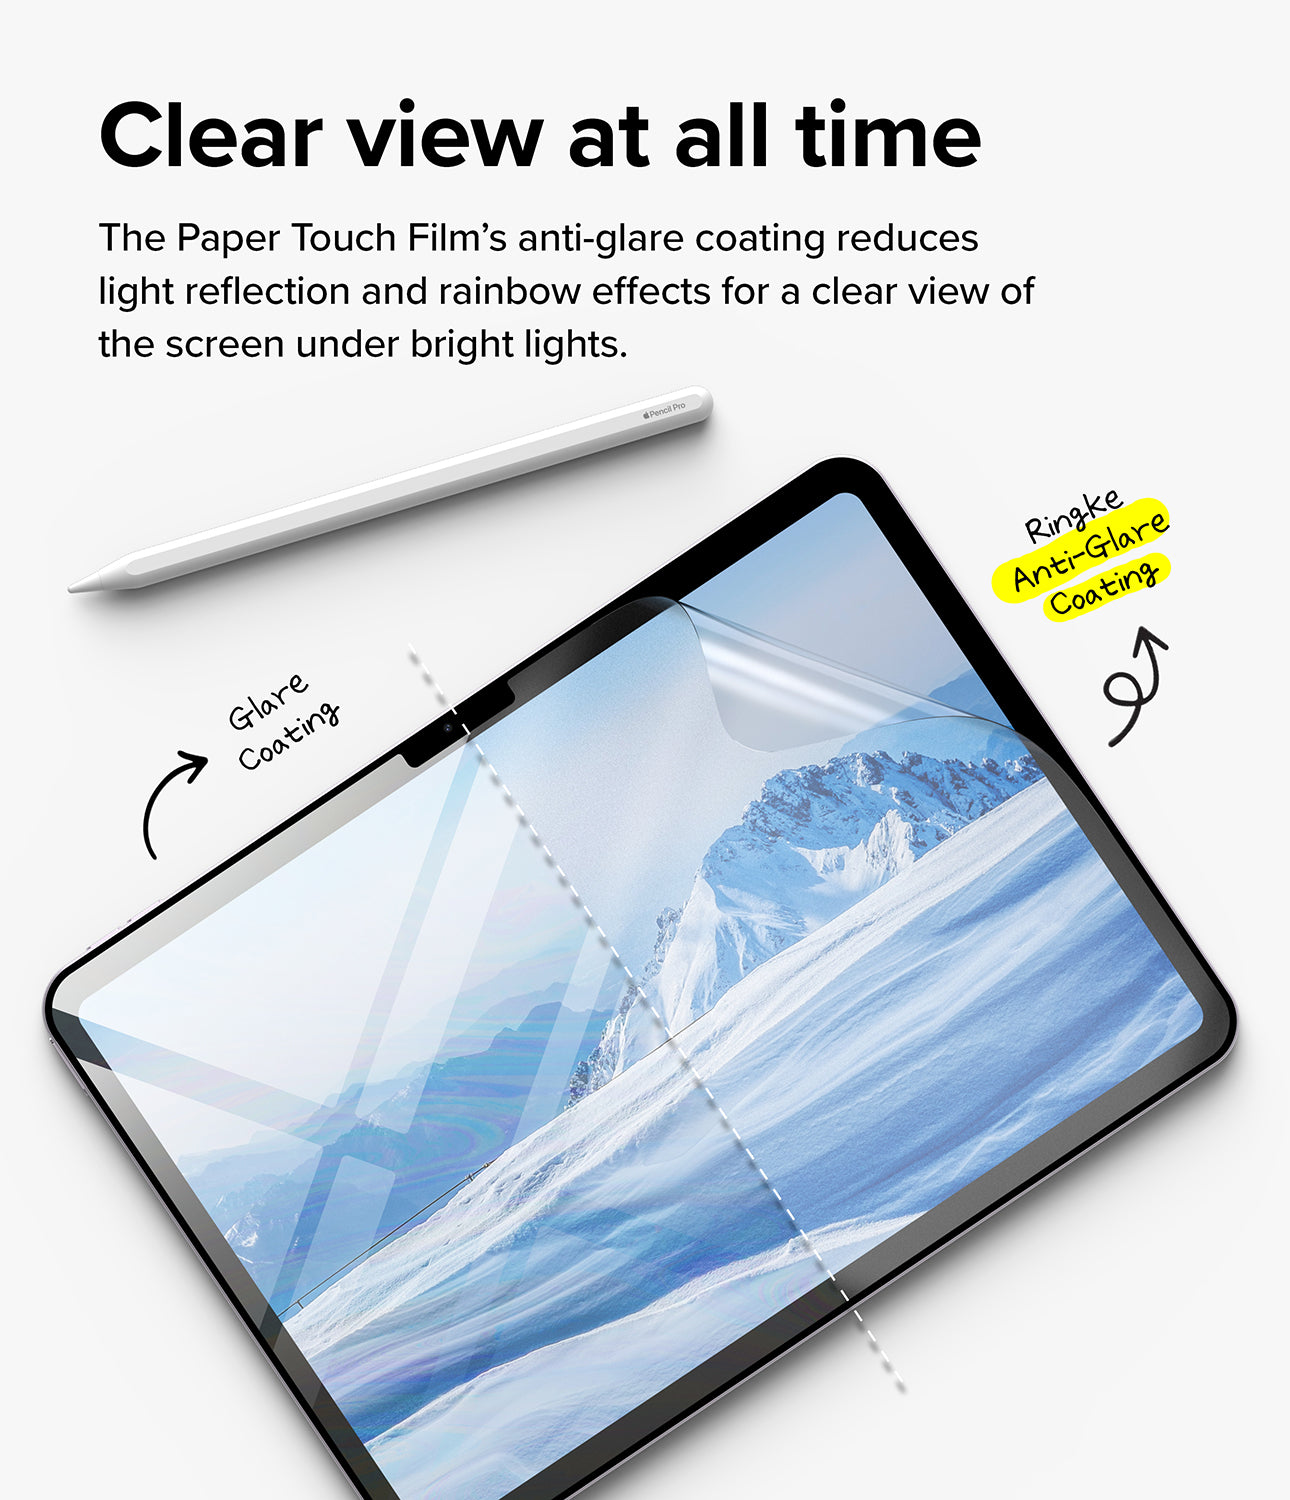 iPad Air 11" (M2) Screen Protector | Paper Touch Film - Hard - Clear view at all time. The Paper Touch Film's anti-glare coating reduces light reflection and rainbow effects for a clear view of the screen under bright lights.